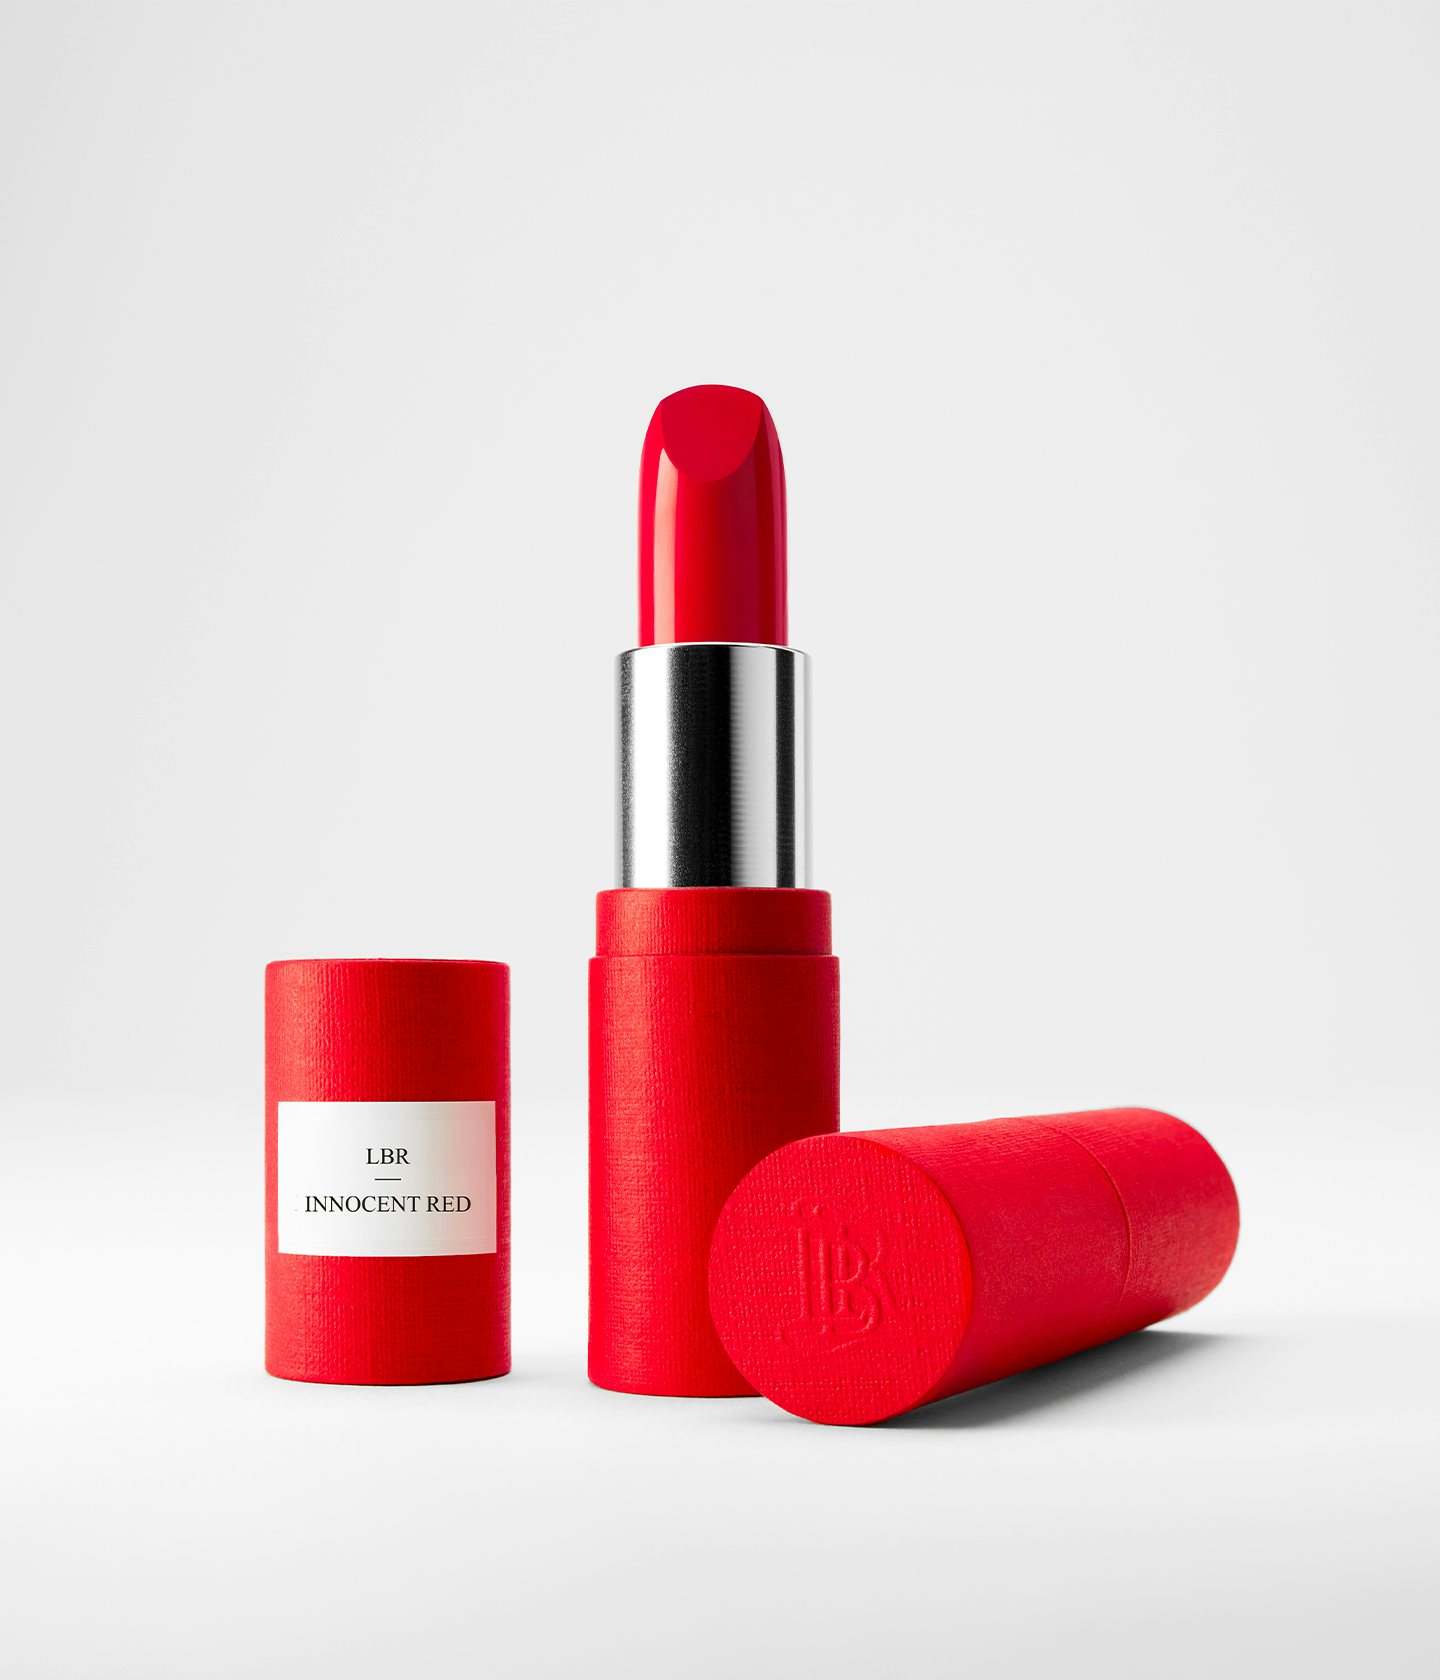 La bouche rouge Innocent Red lipstick in the red paper case